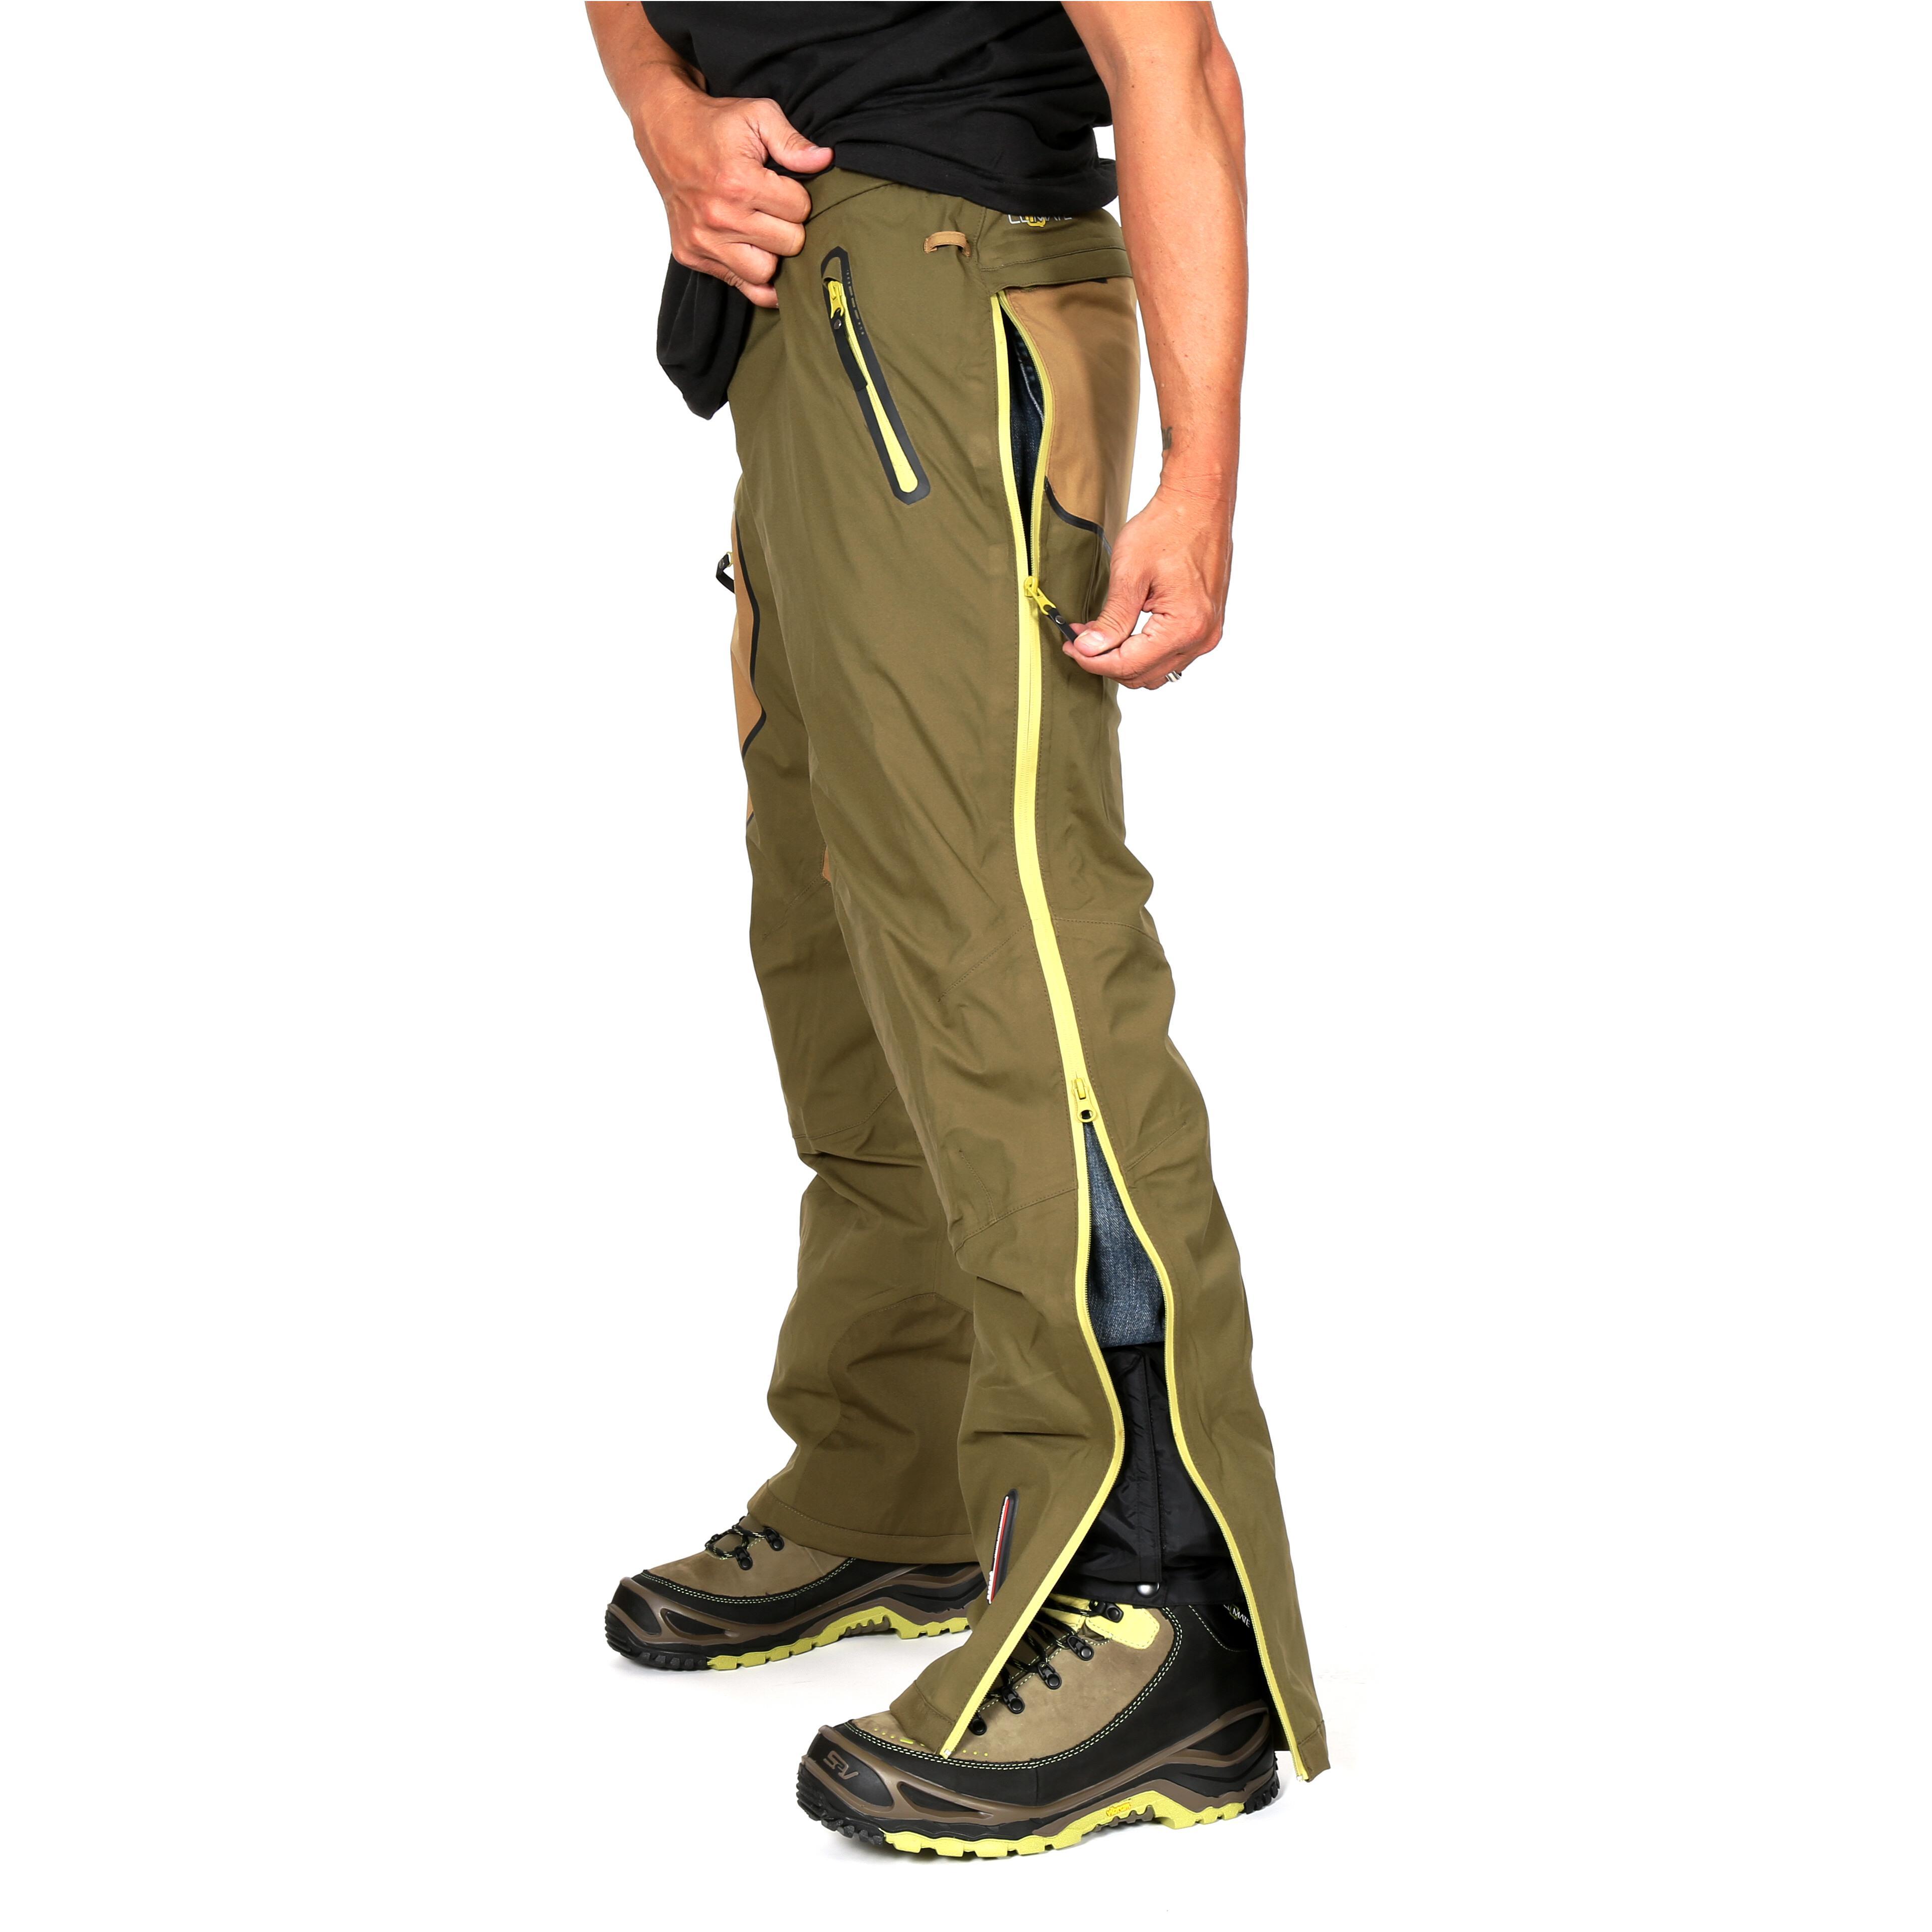 Get Men's Waterproof Insulated Provision Pants, Rocky S2V